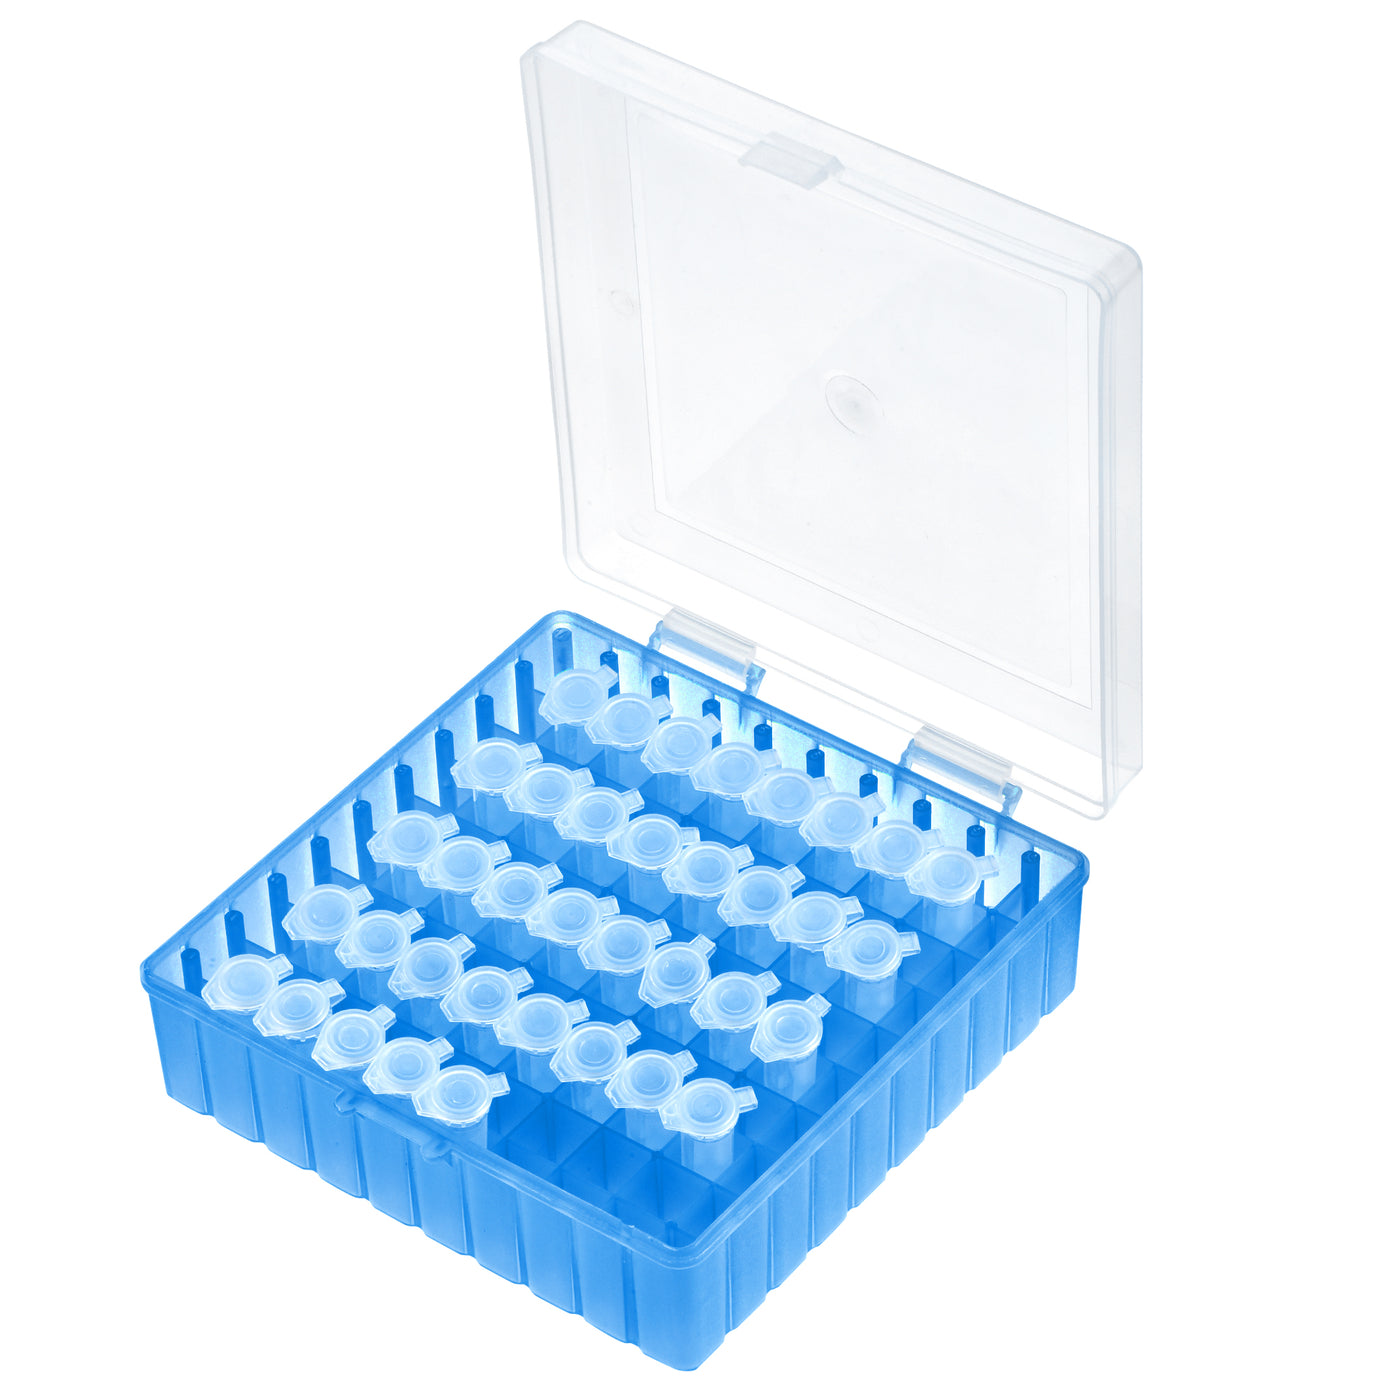 uxcell Uxcell Freezer Tube Box 100 Places Polypropylene Plastic Lockable Holder Rack for 1.5/1.8/2ml Microcentrifuge Tubes, Blue